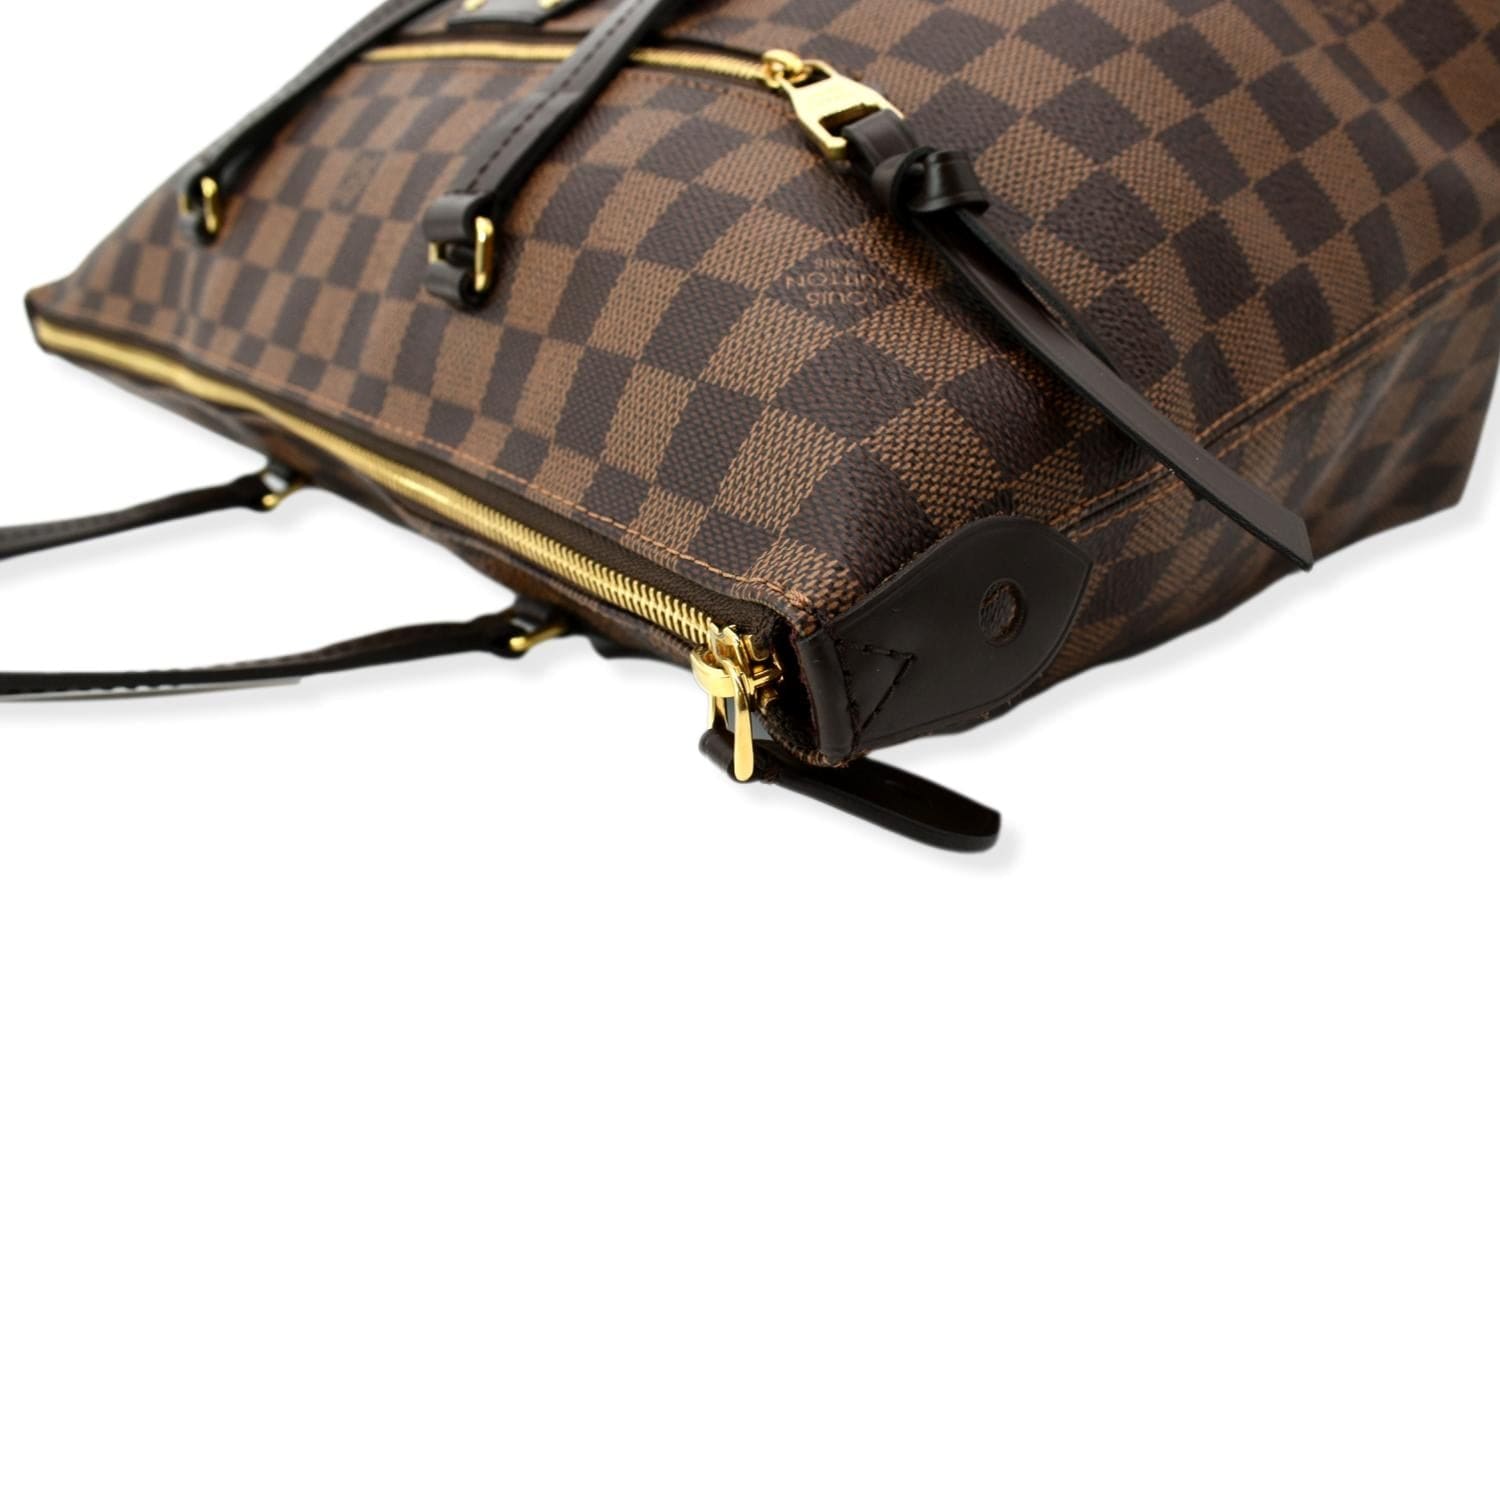 The Louis tote - Brown personalised checkered tote bag – Hudson